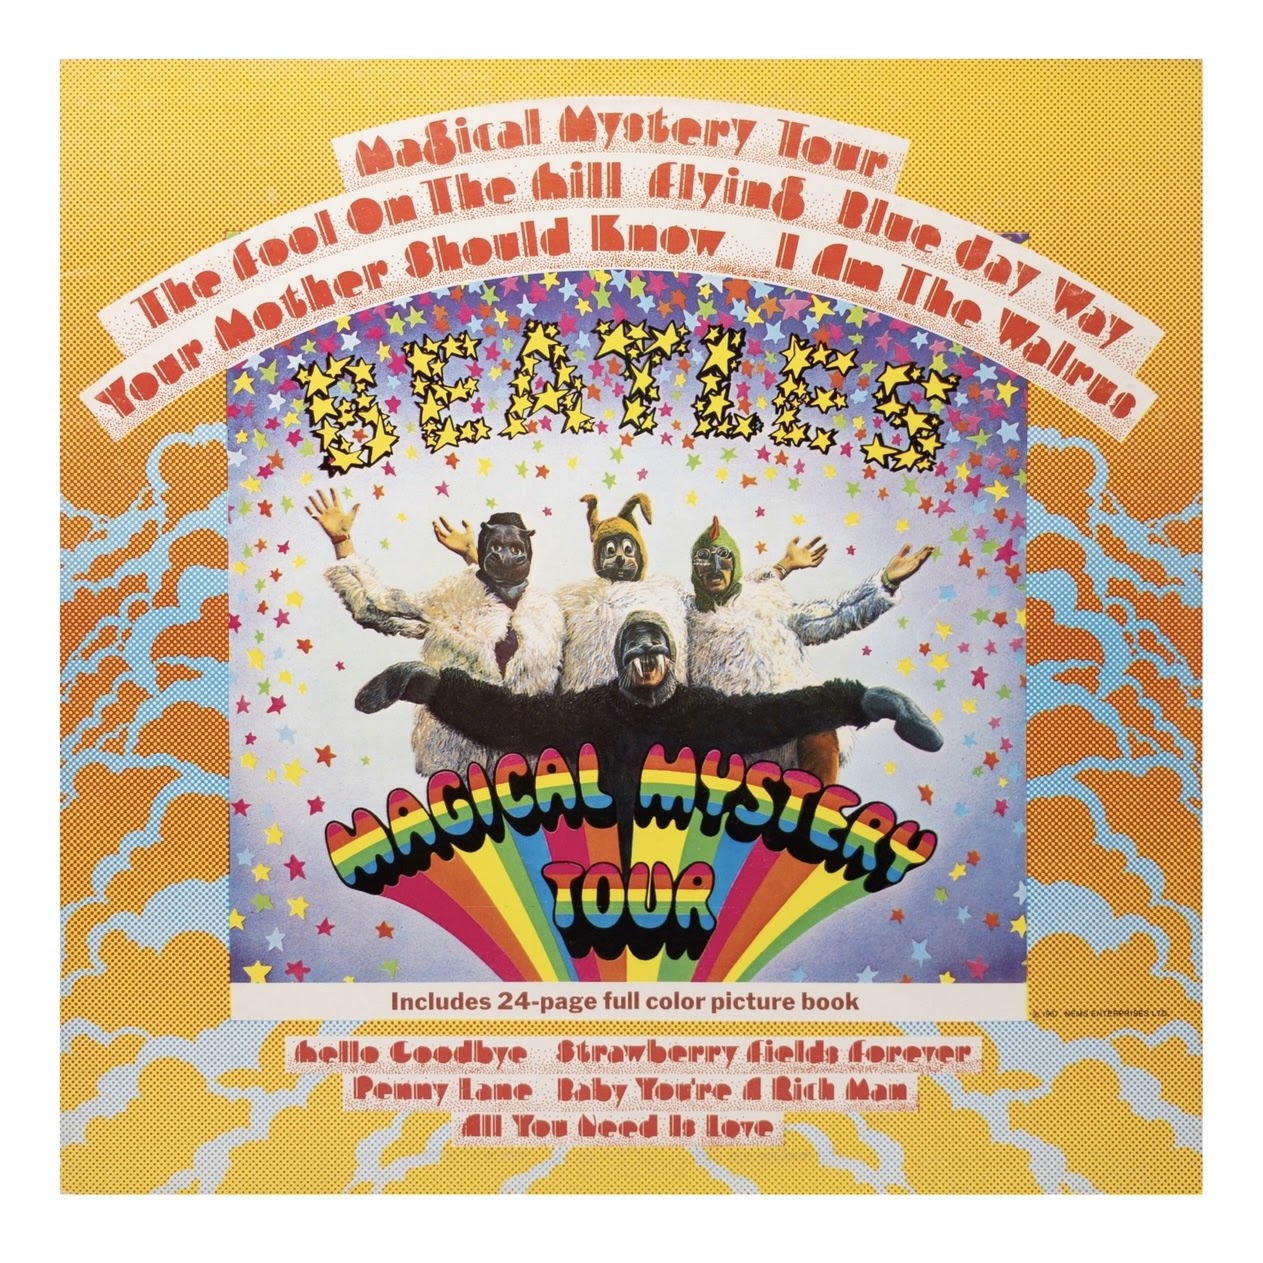 The Beatles: 'Magical Mystery Tour' 1967 LP with Inserts